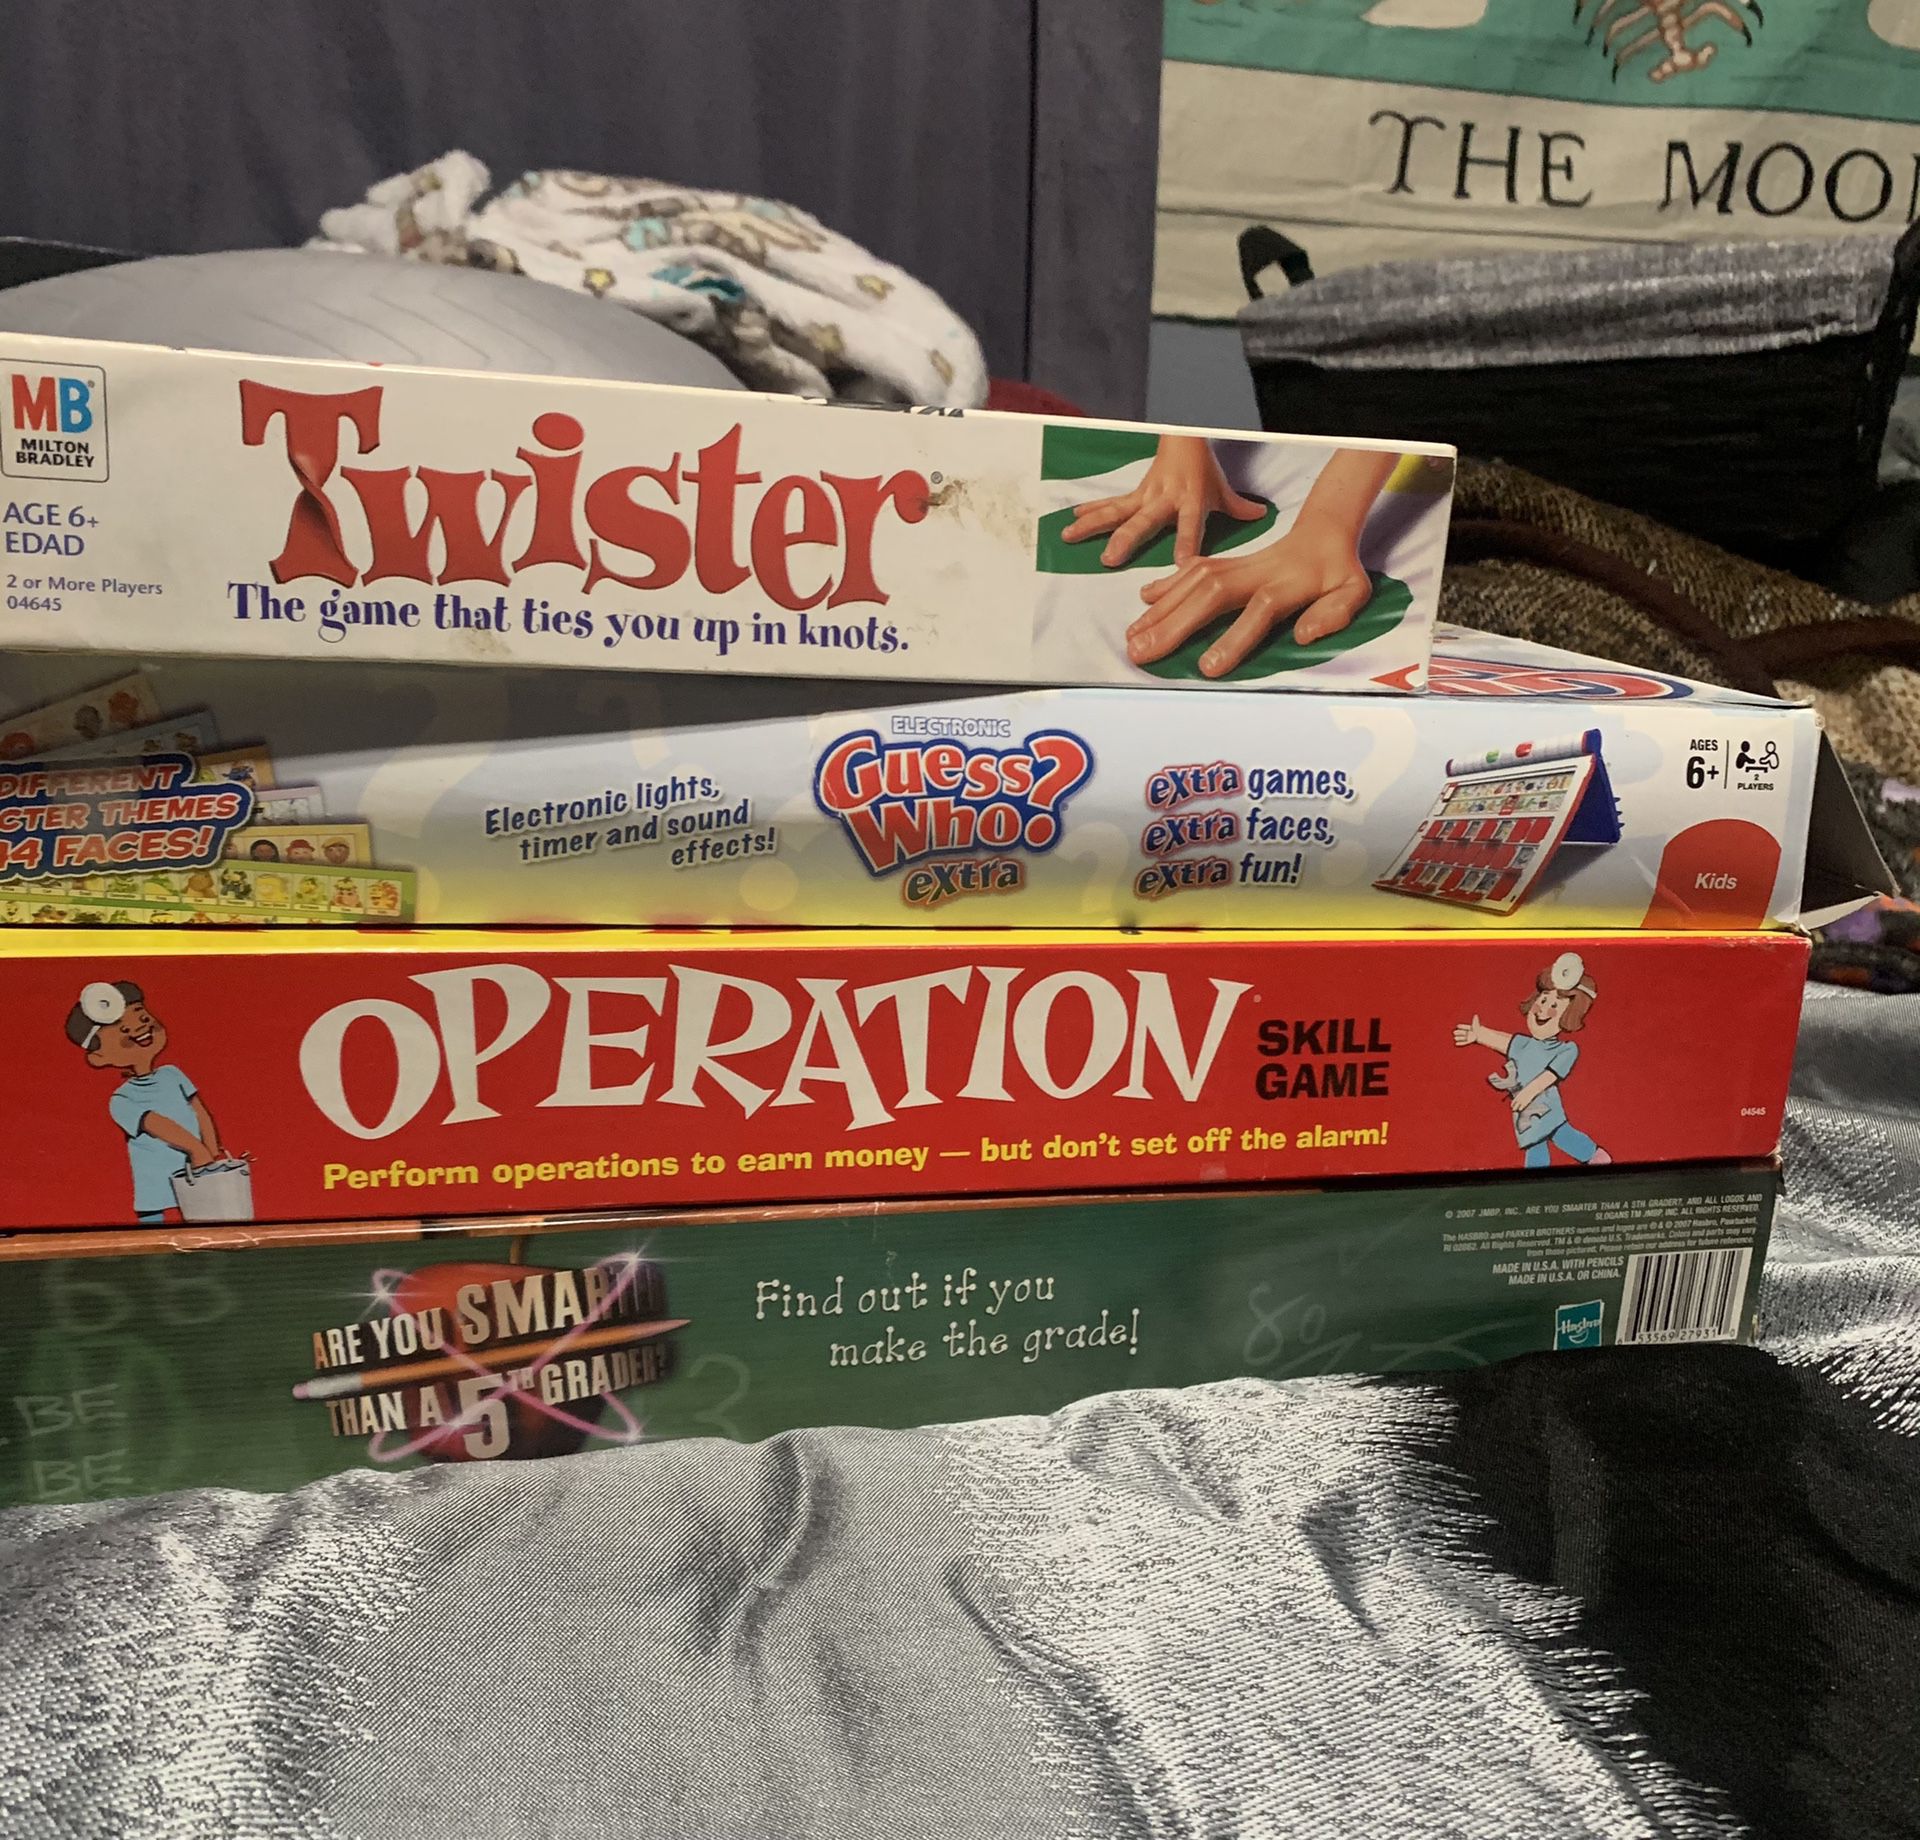 Board game bundle: Twister, Operation, Guess Who, Are you Smarter than a 5th Grader